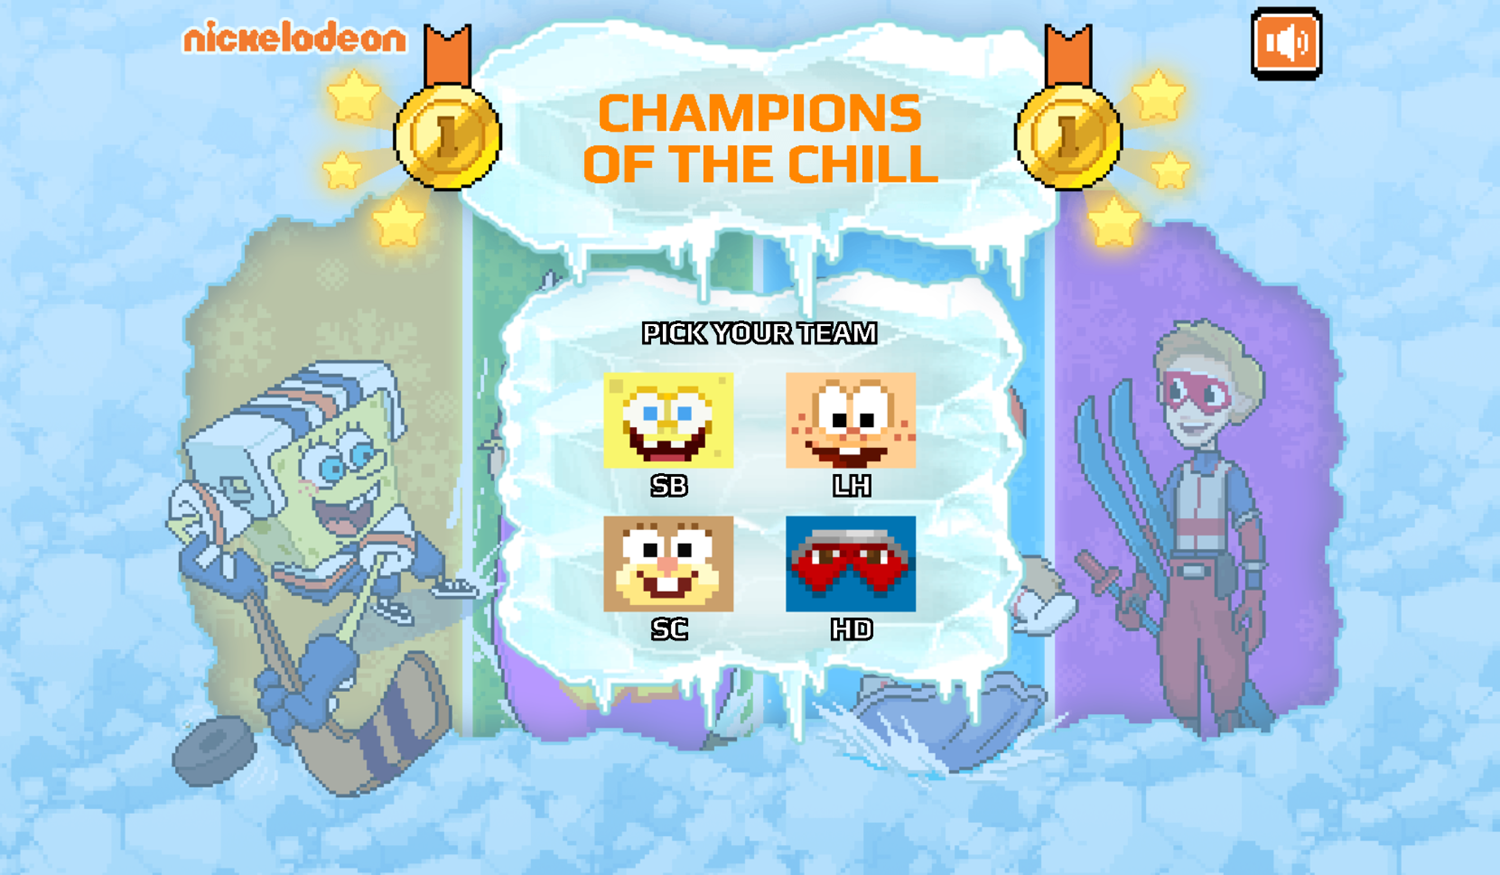 Nick Champions of the Chill 2 Game Pick Team Screenshot.